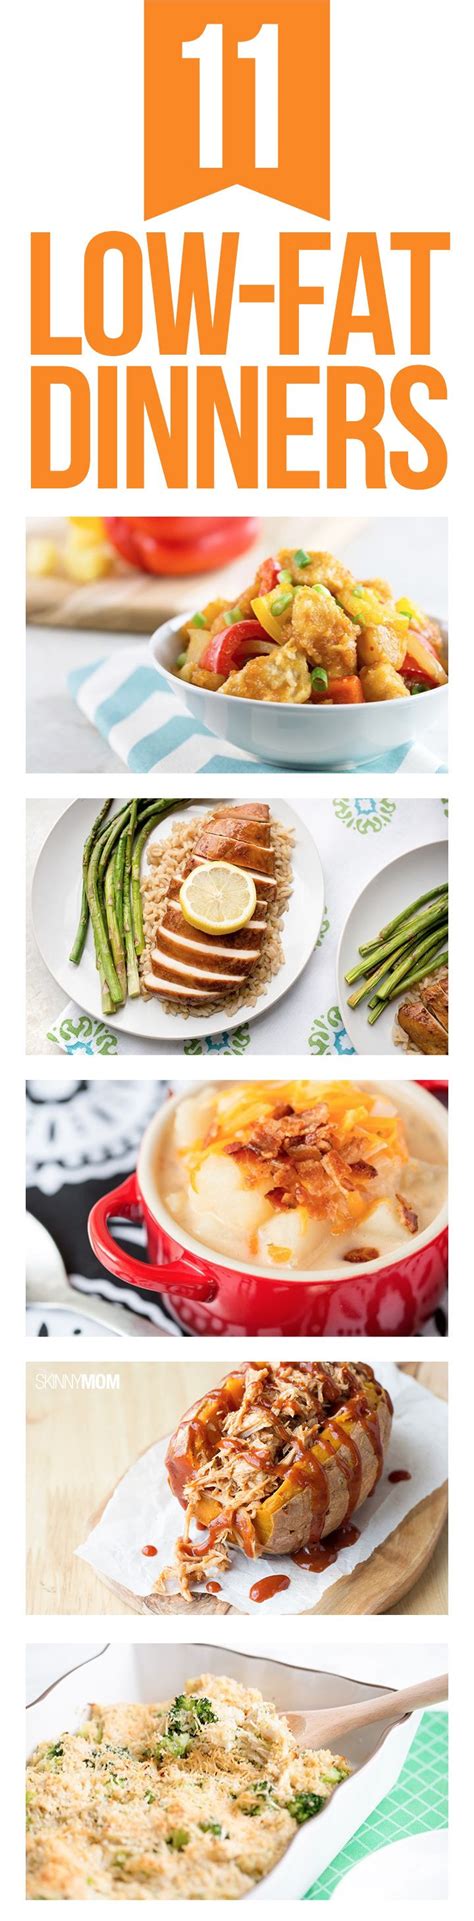 Heart healthy eating shouldn't' be complicated! 20 Of the Best Ideas for Low Cholesterol Dinner Recipes ...